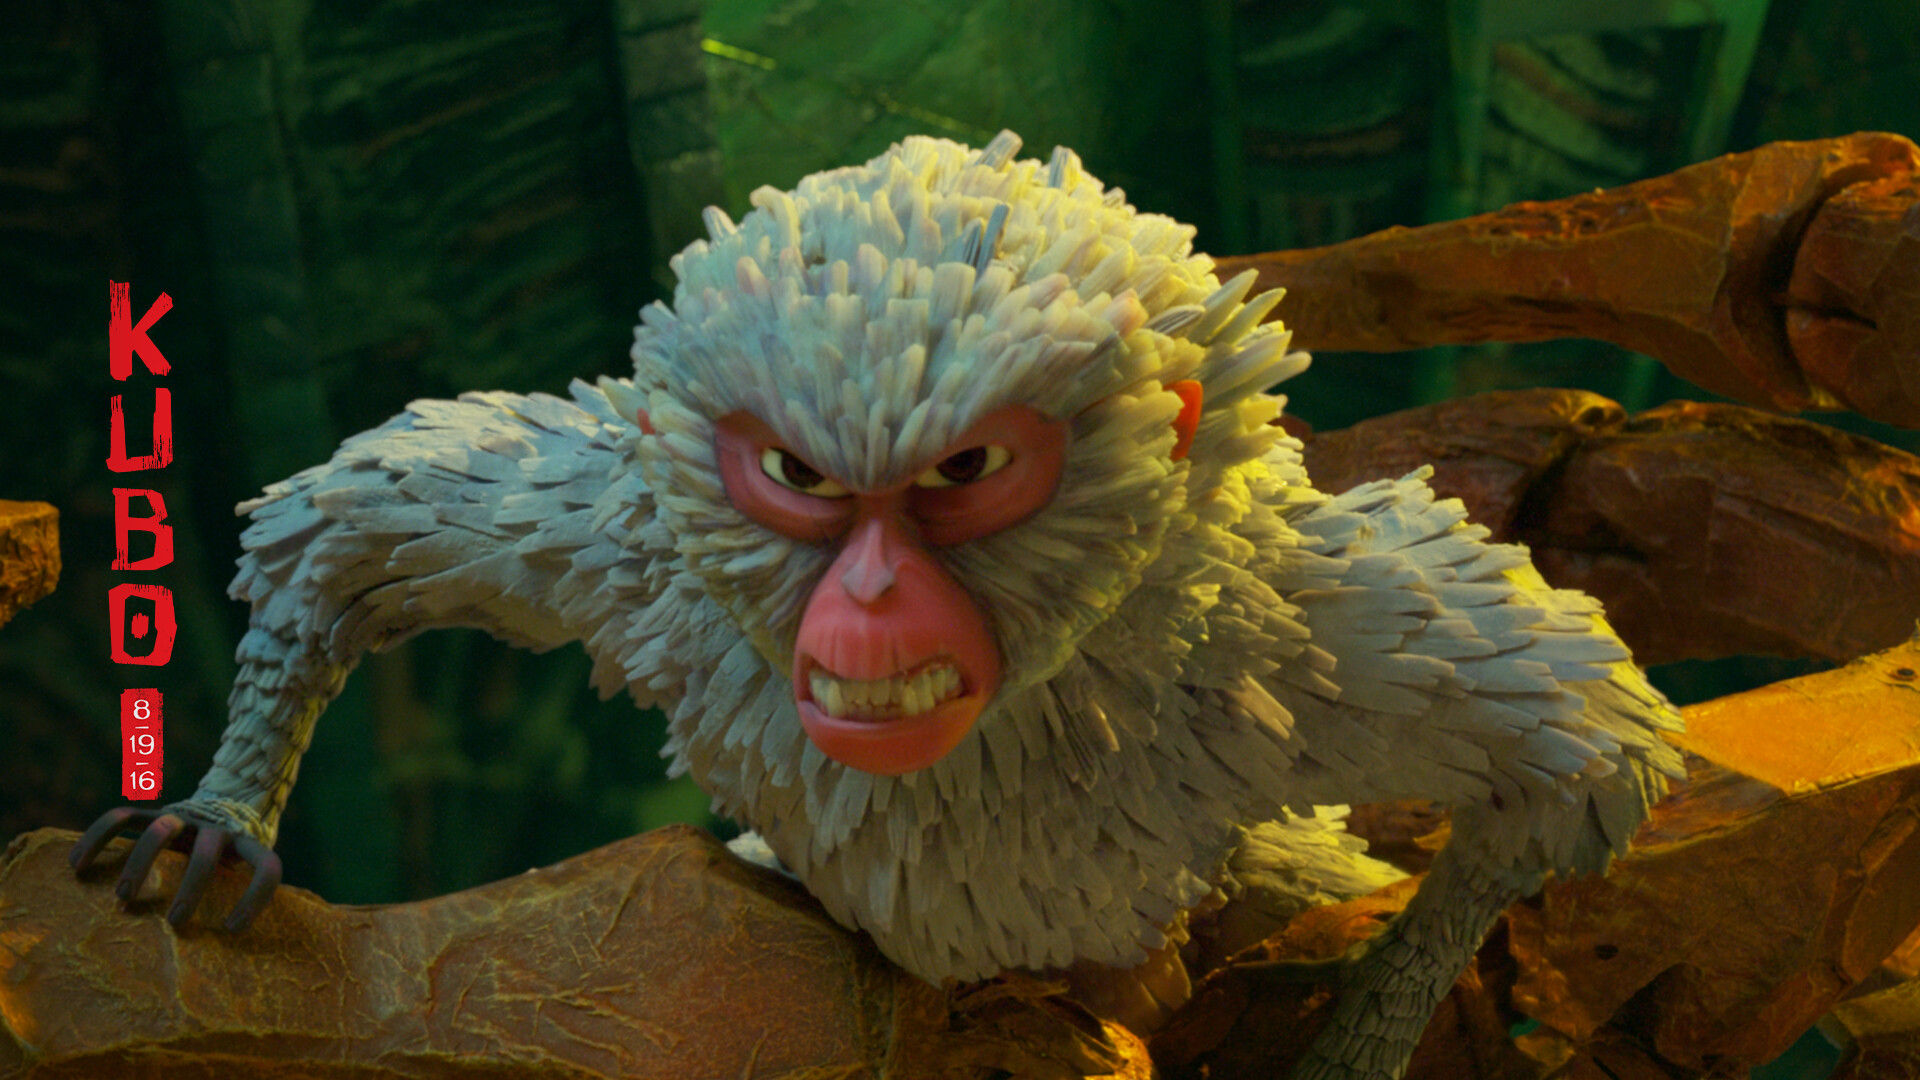 Kubo and the Two Strings: A stop-motion animated fantasy adventure, Monkey. 1920x1080 Full HD Background.